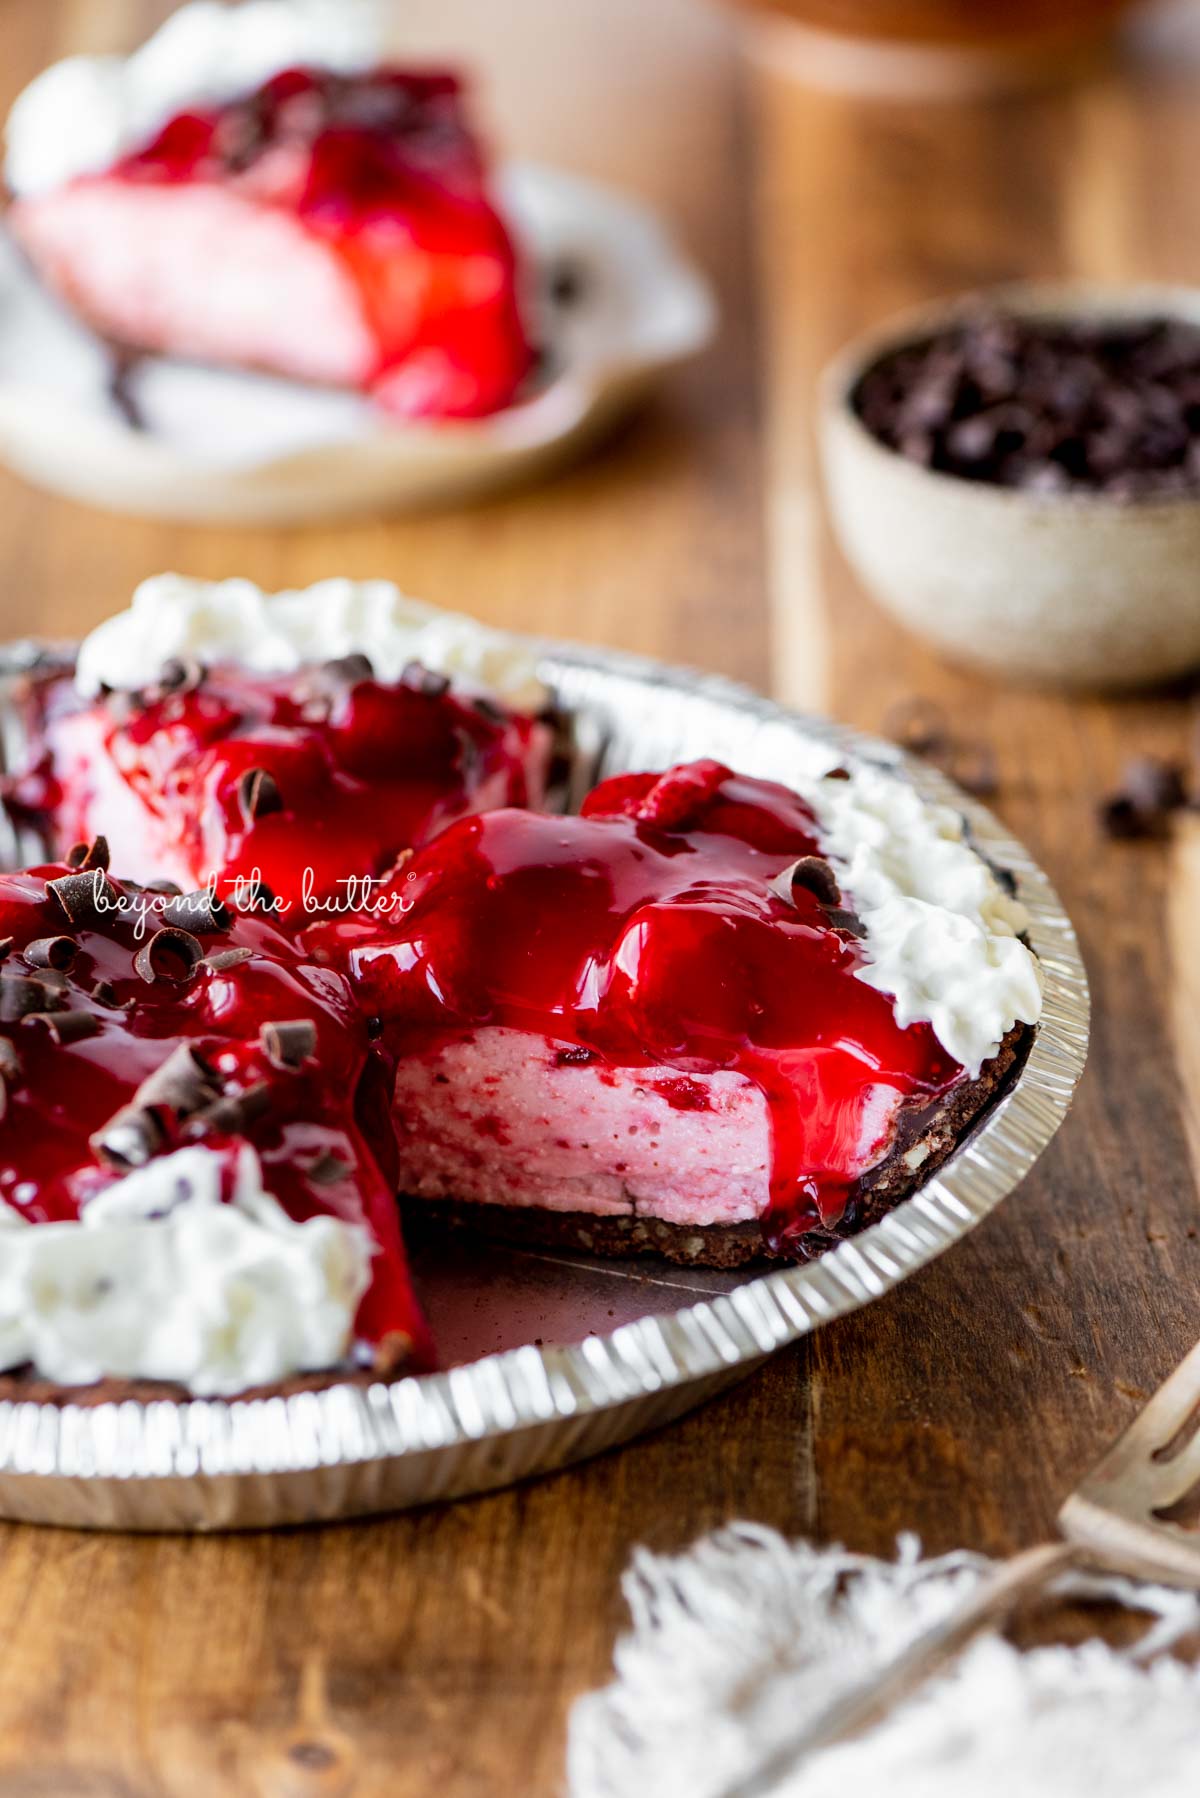 Sliced no bake strawberry chocolate cream pie on wood table with a fork and small bowl of chocolate curls nearby.